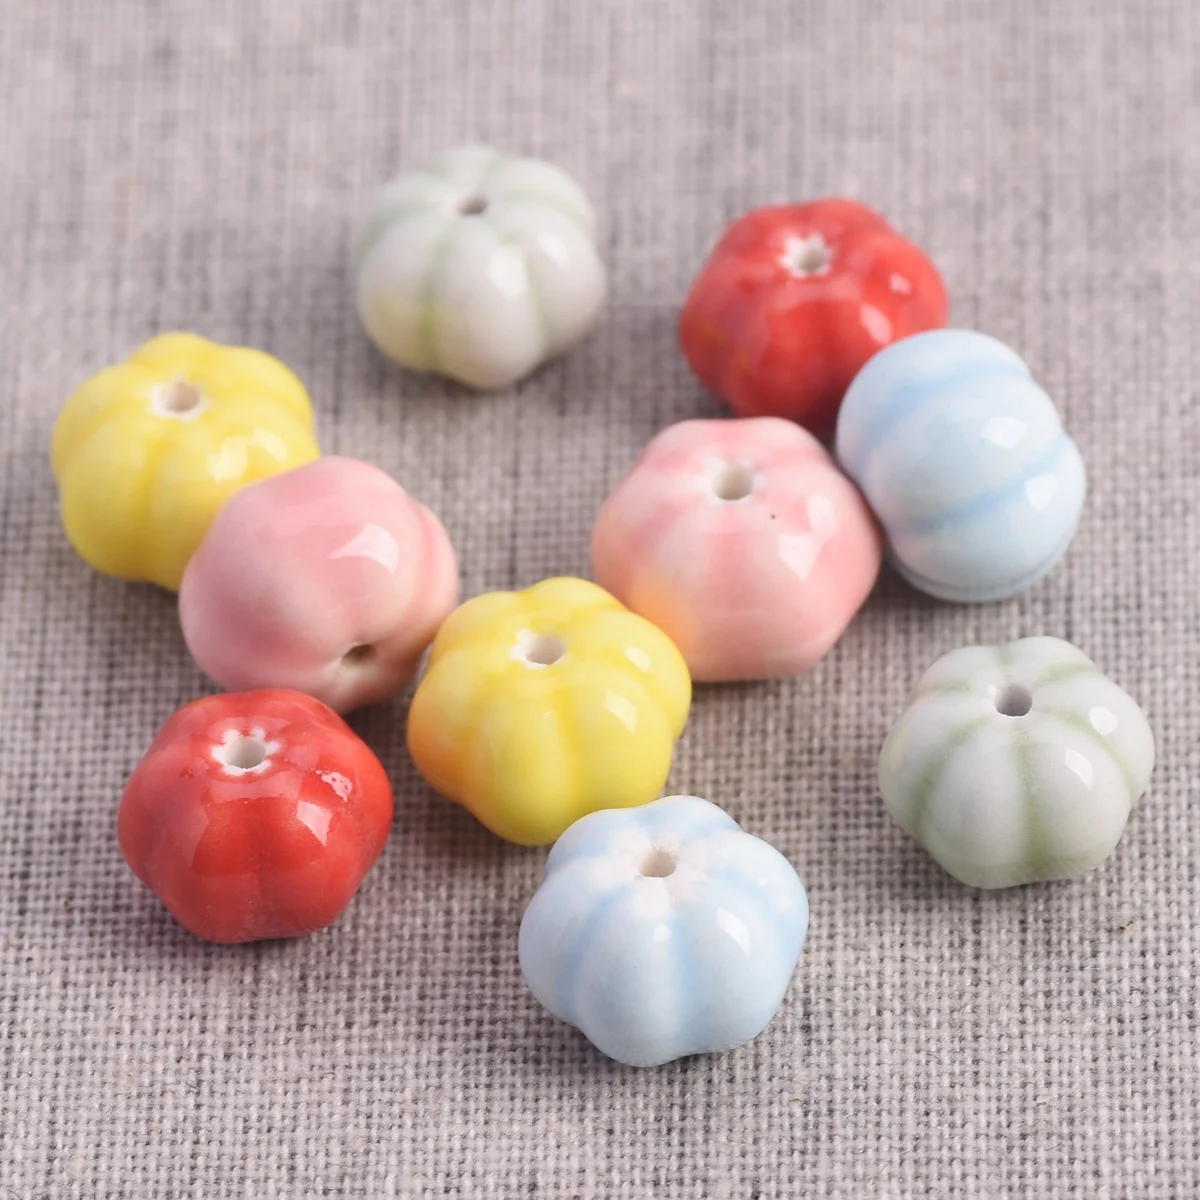 5pcs Round Pumpkin Shape 13x10mm Handmade Glaze Ceramic Porcelain Loose Spacer Beads For Jewelry Making DIY Findings 5pcs non inductive ceramic cement resistor 5w 0 01 0 015 0 022 0 02 0 025 0 03 0 047 0 05 ohm 0 01r 0 015r 0 022r 0 02r 0 025r